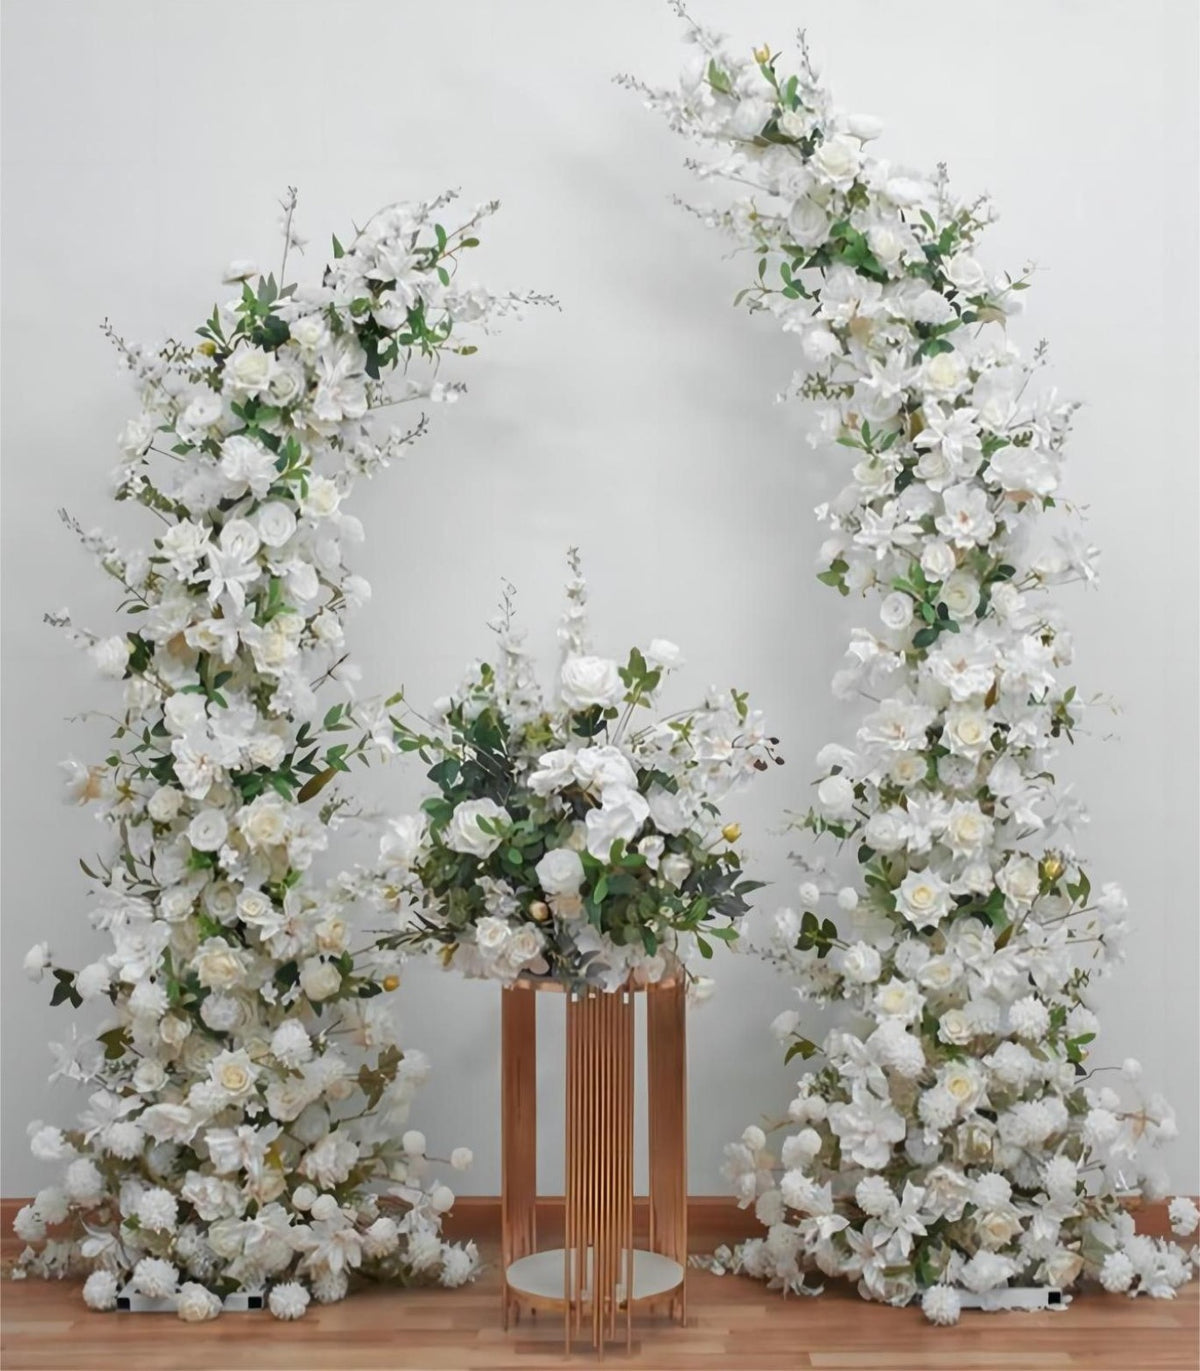 Horn Arch White Orchid Rose Artificial Flower Wedding Party Birthday Backdrop Decor CH9686-6